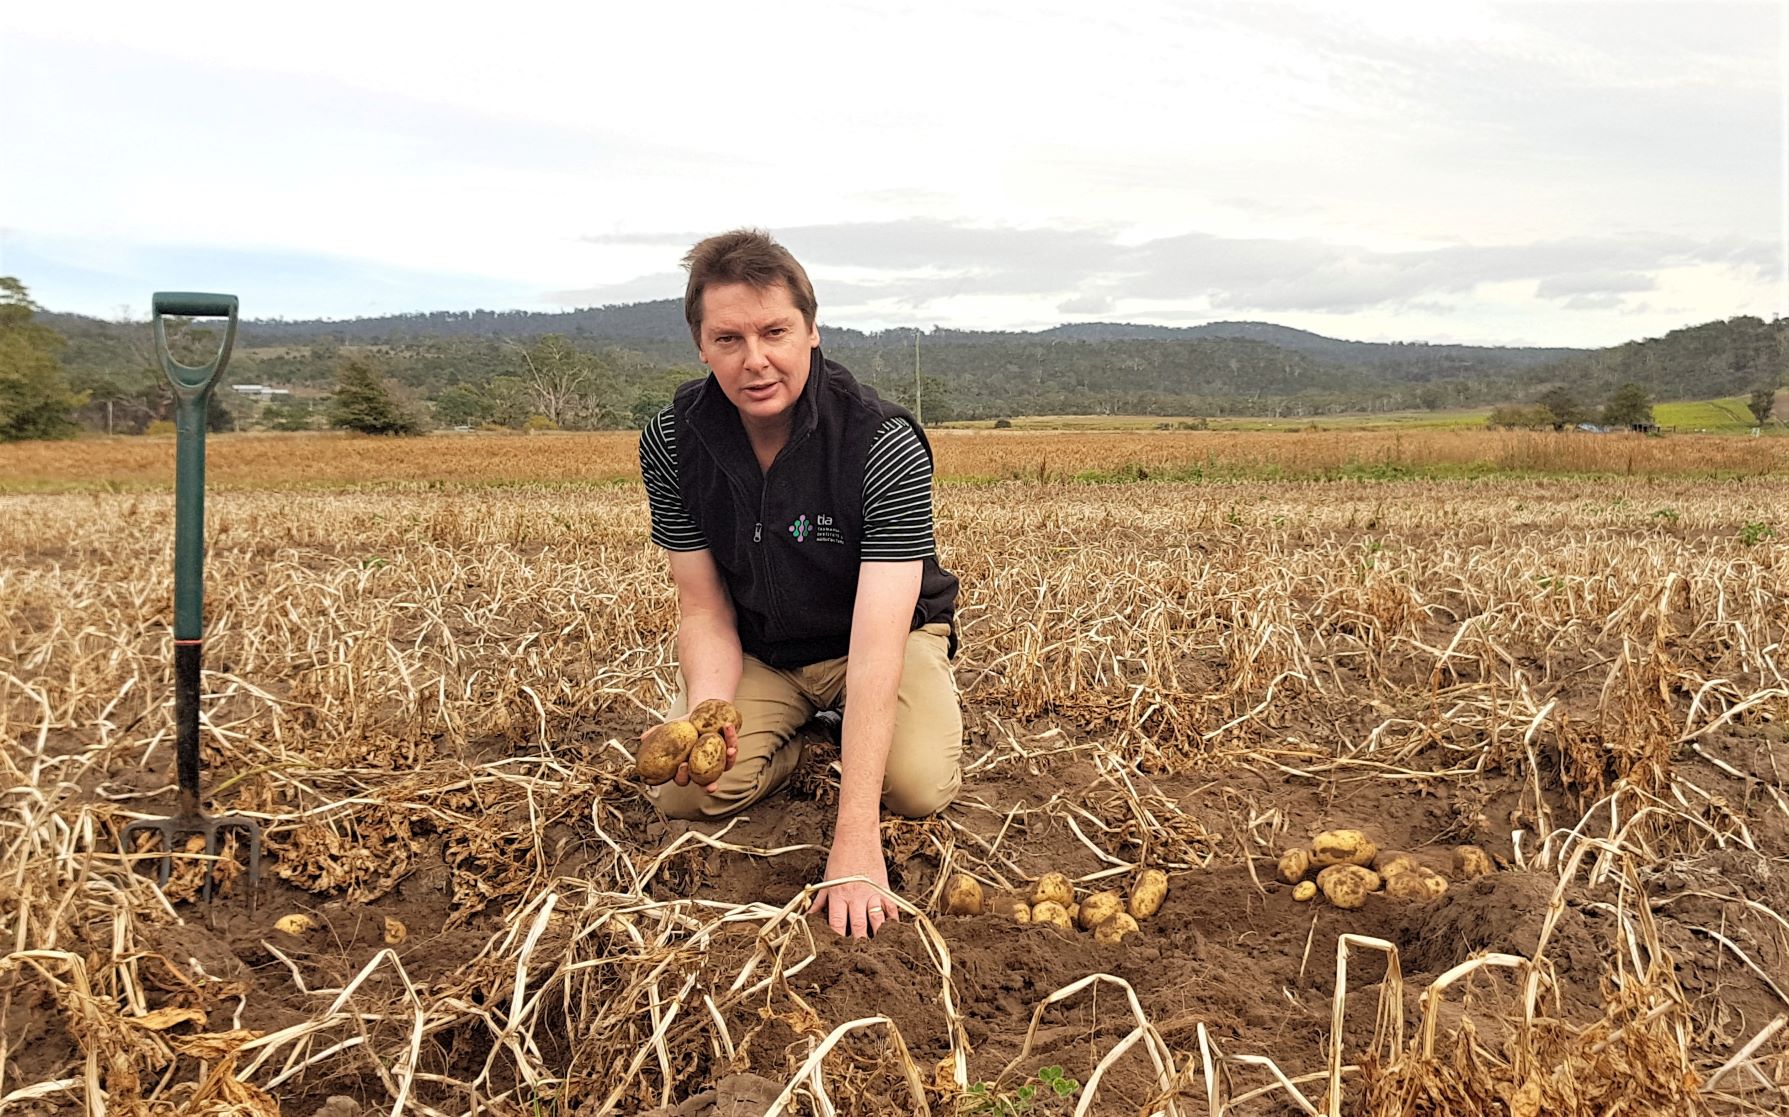 Thumbnail for Research to support Tasmania’s vital potato industry